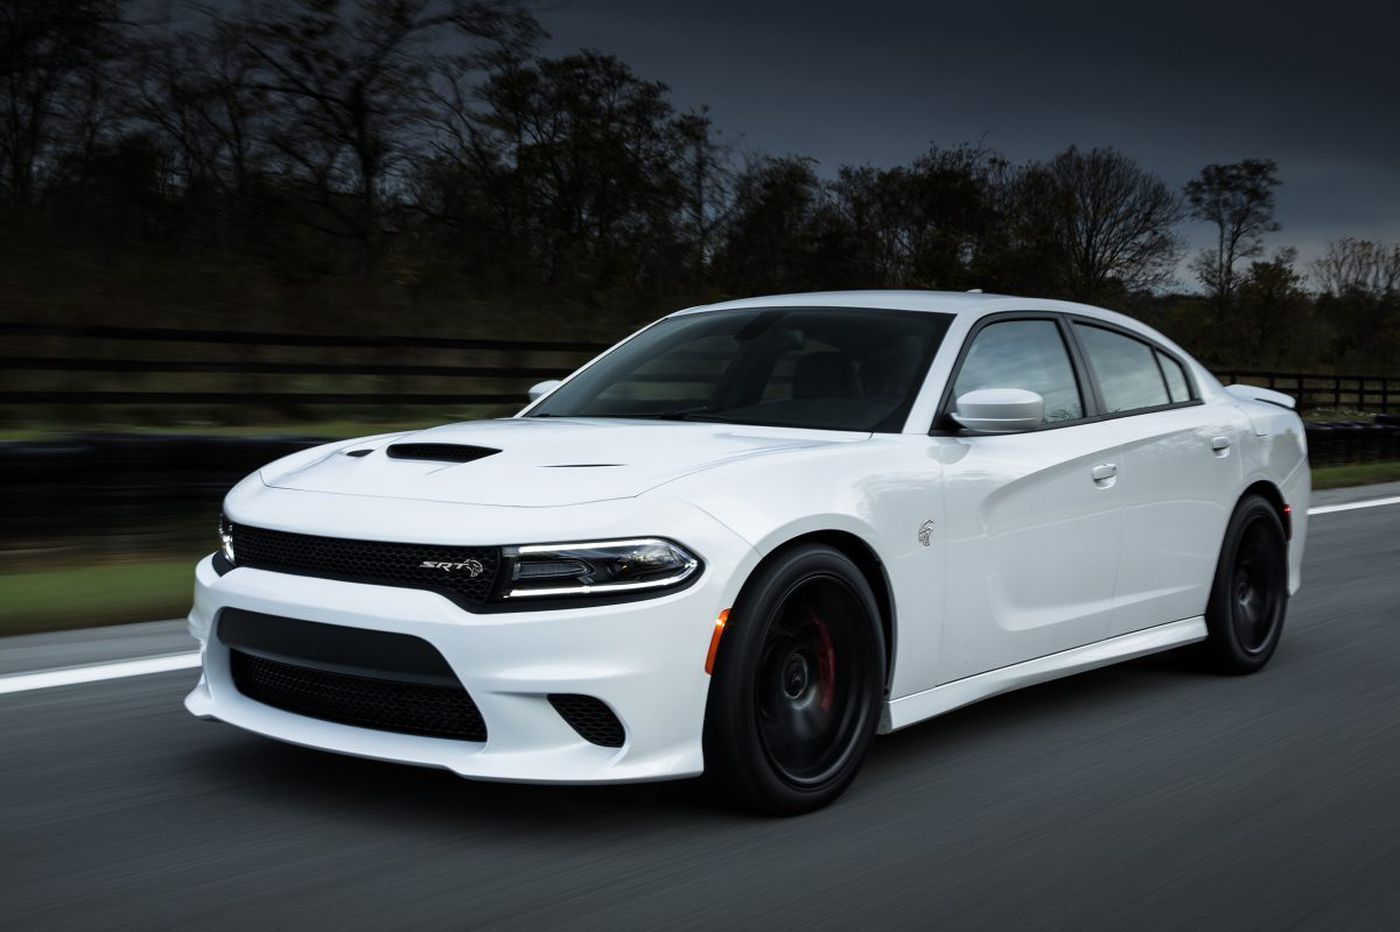 Dodge Charger Hellcat on the highway